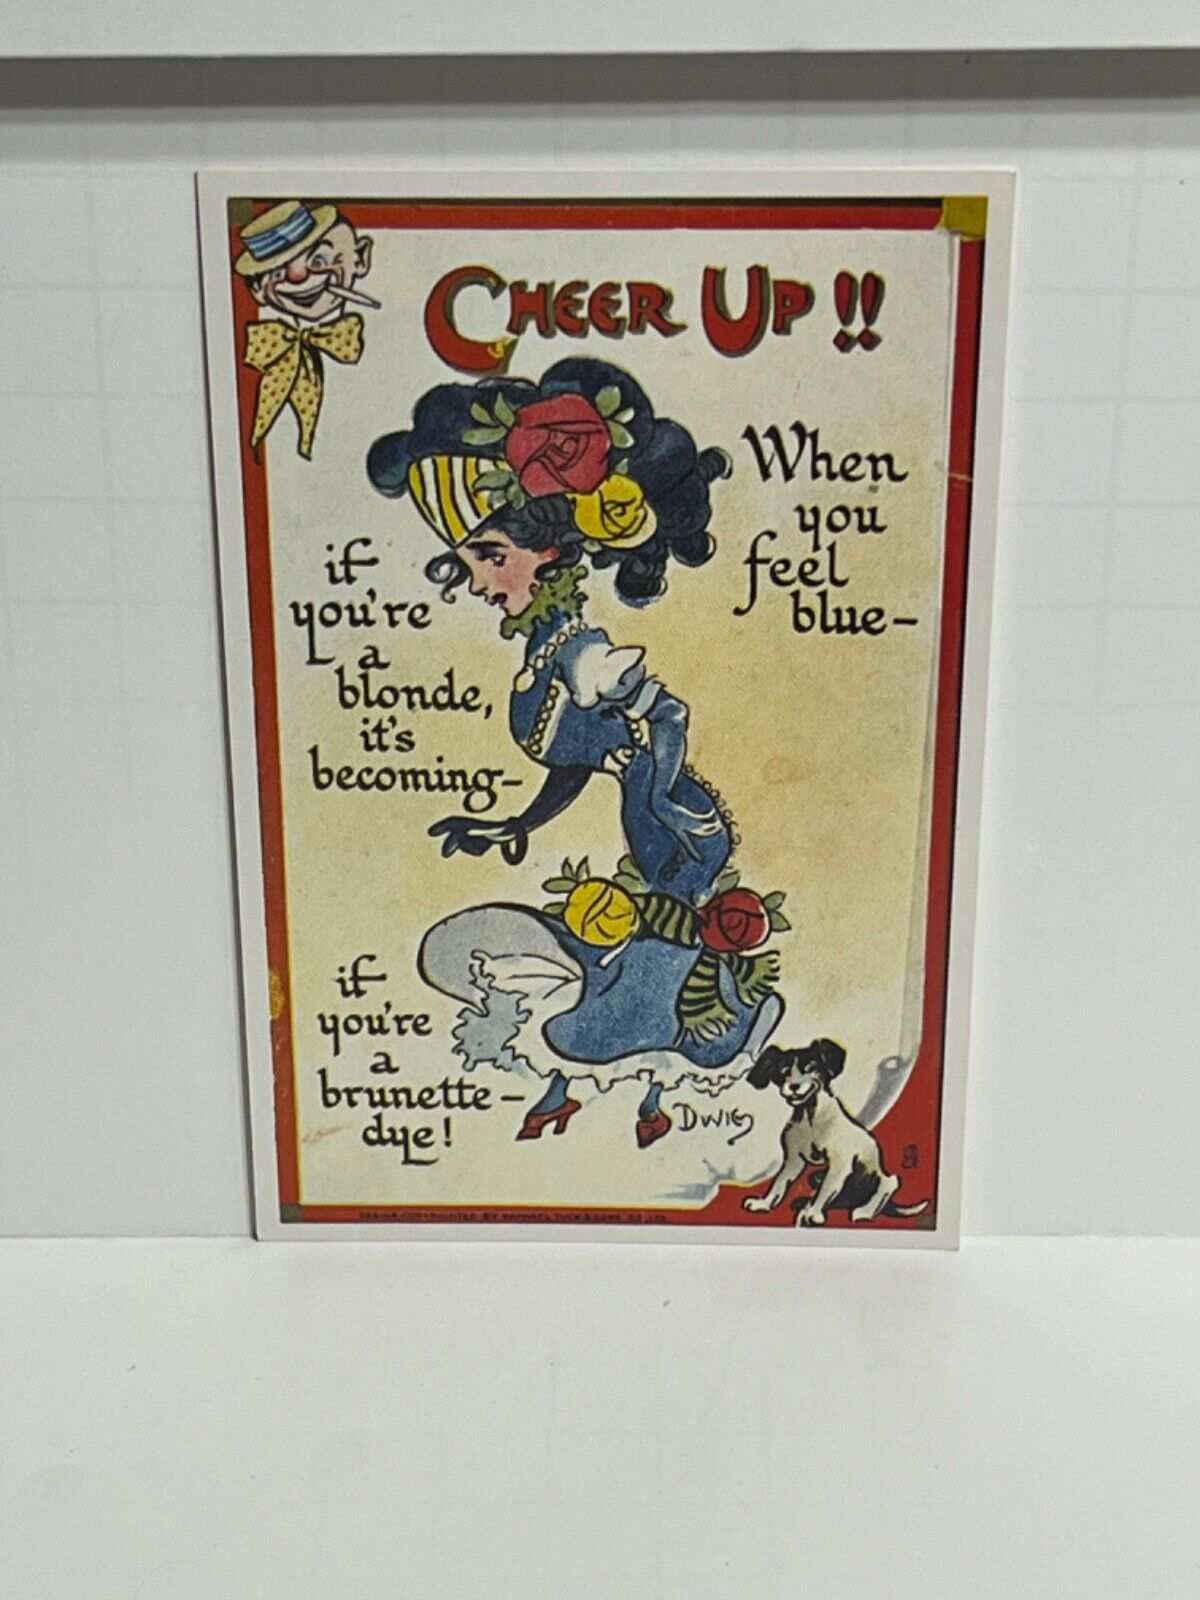 Postcard Humor Cheer Up Woman Dog Artist Signed Dwig Reproduction A69